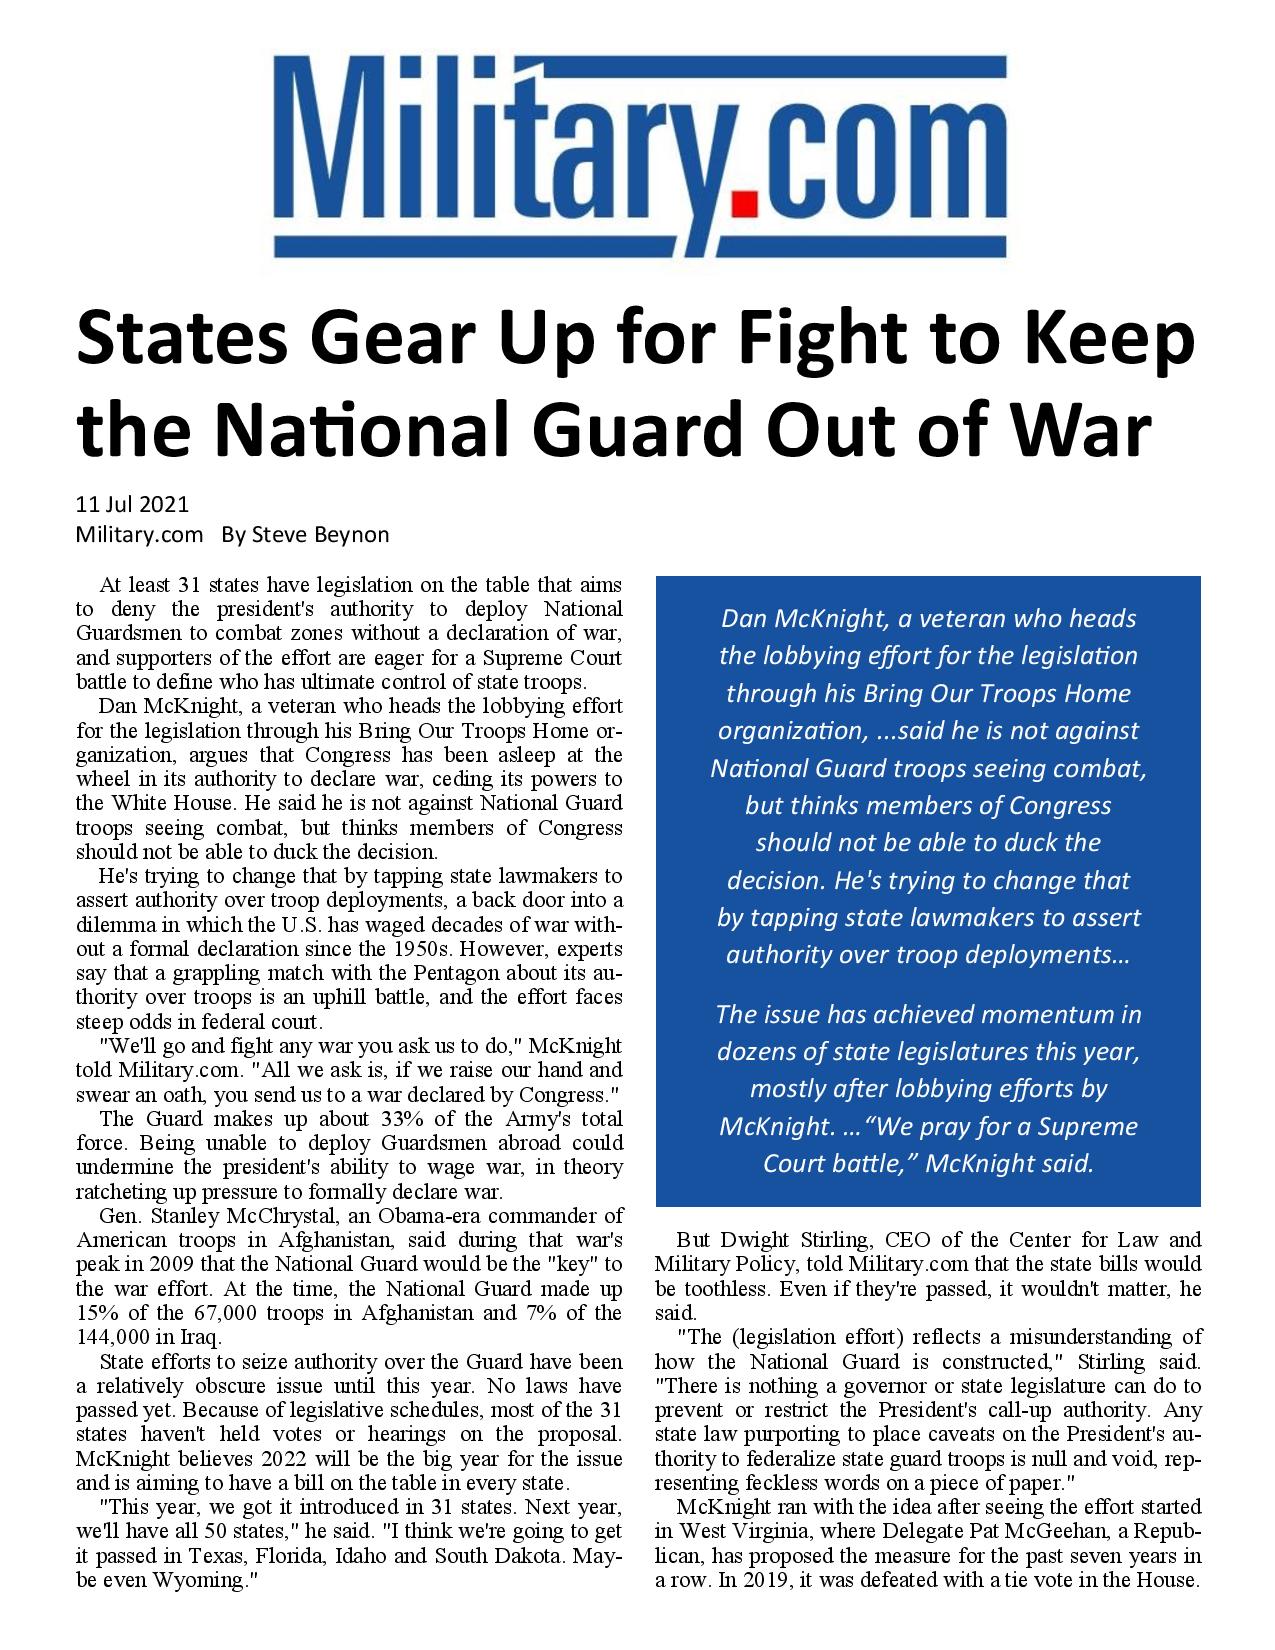 States Gear Up for Fight to Keep the National Guard Out of War